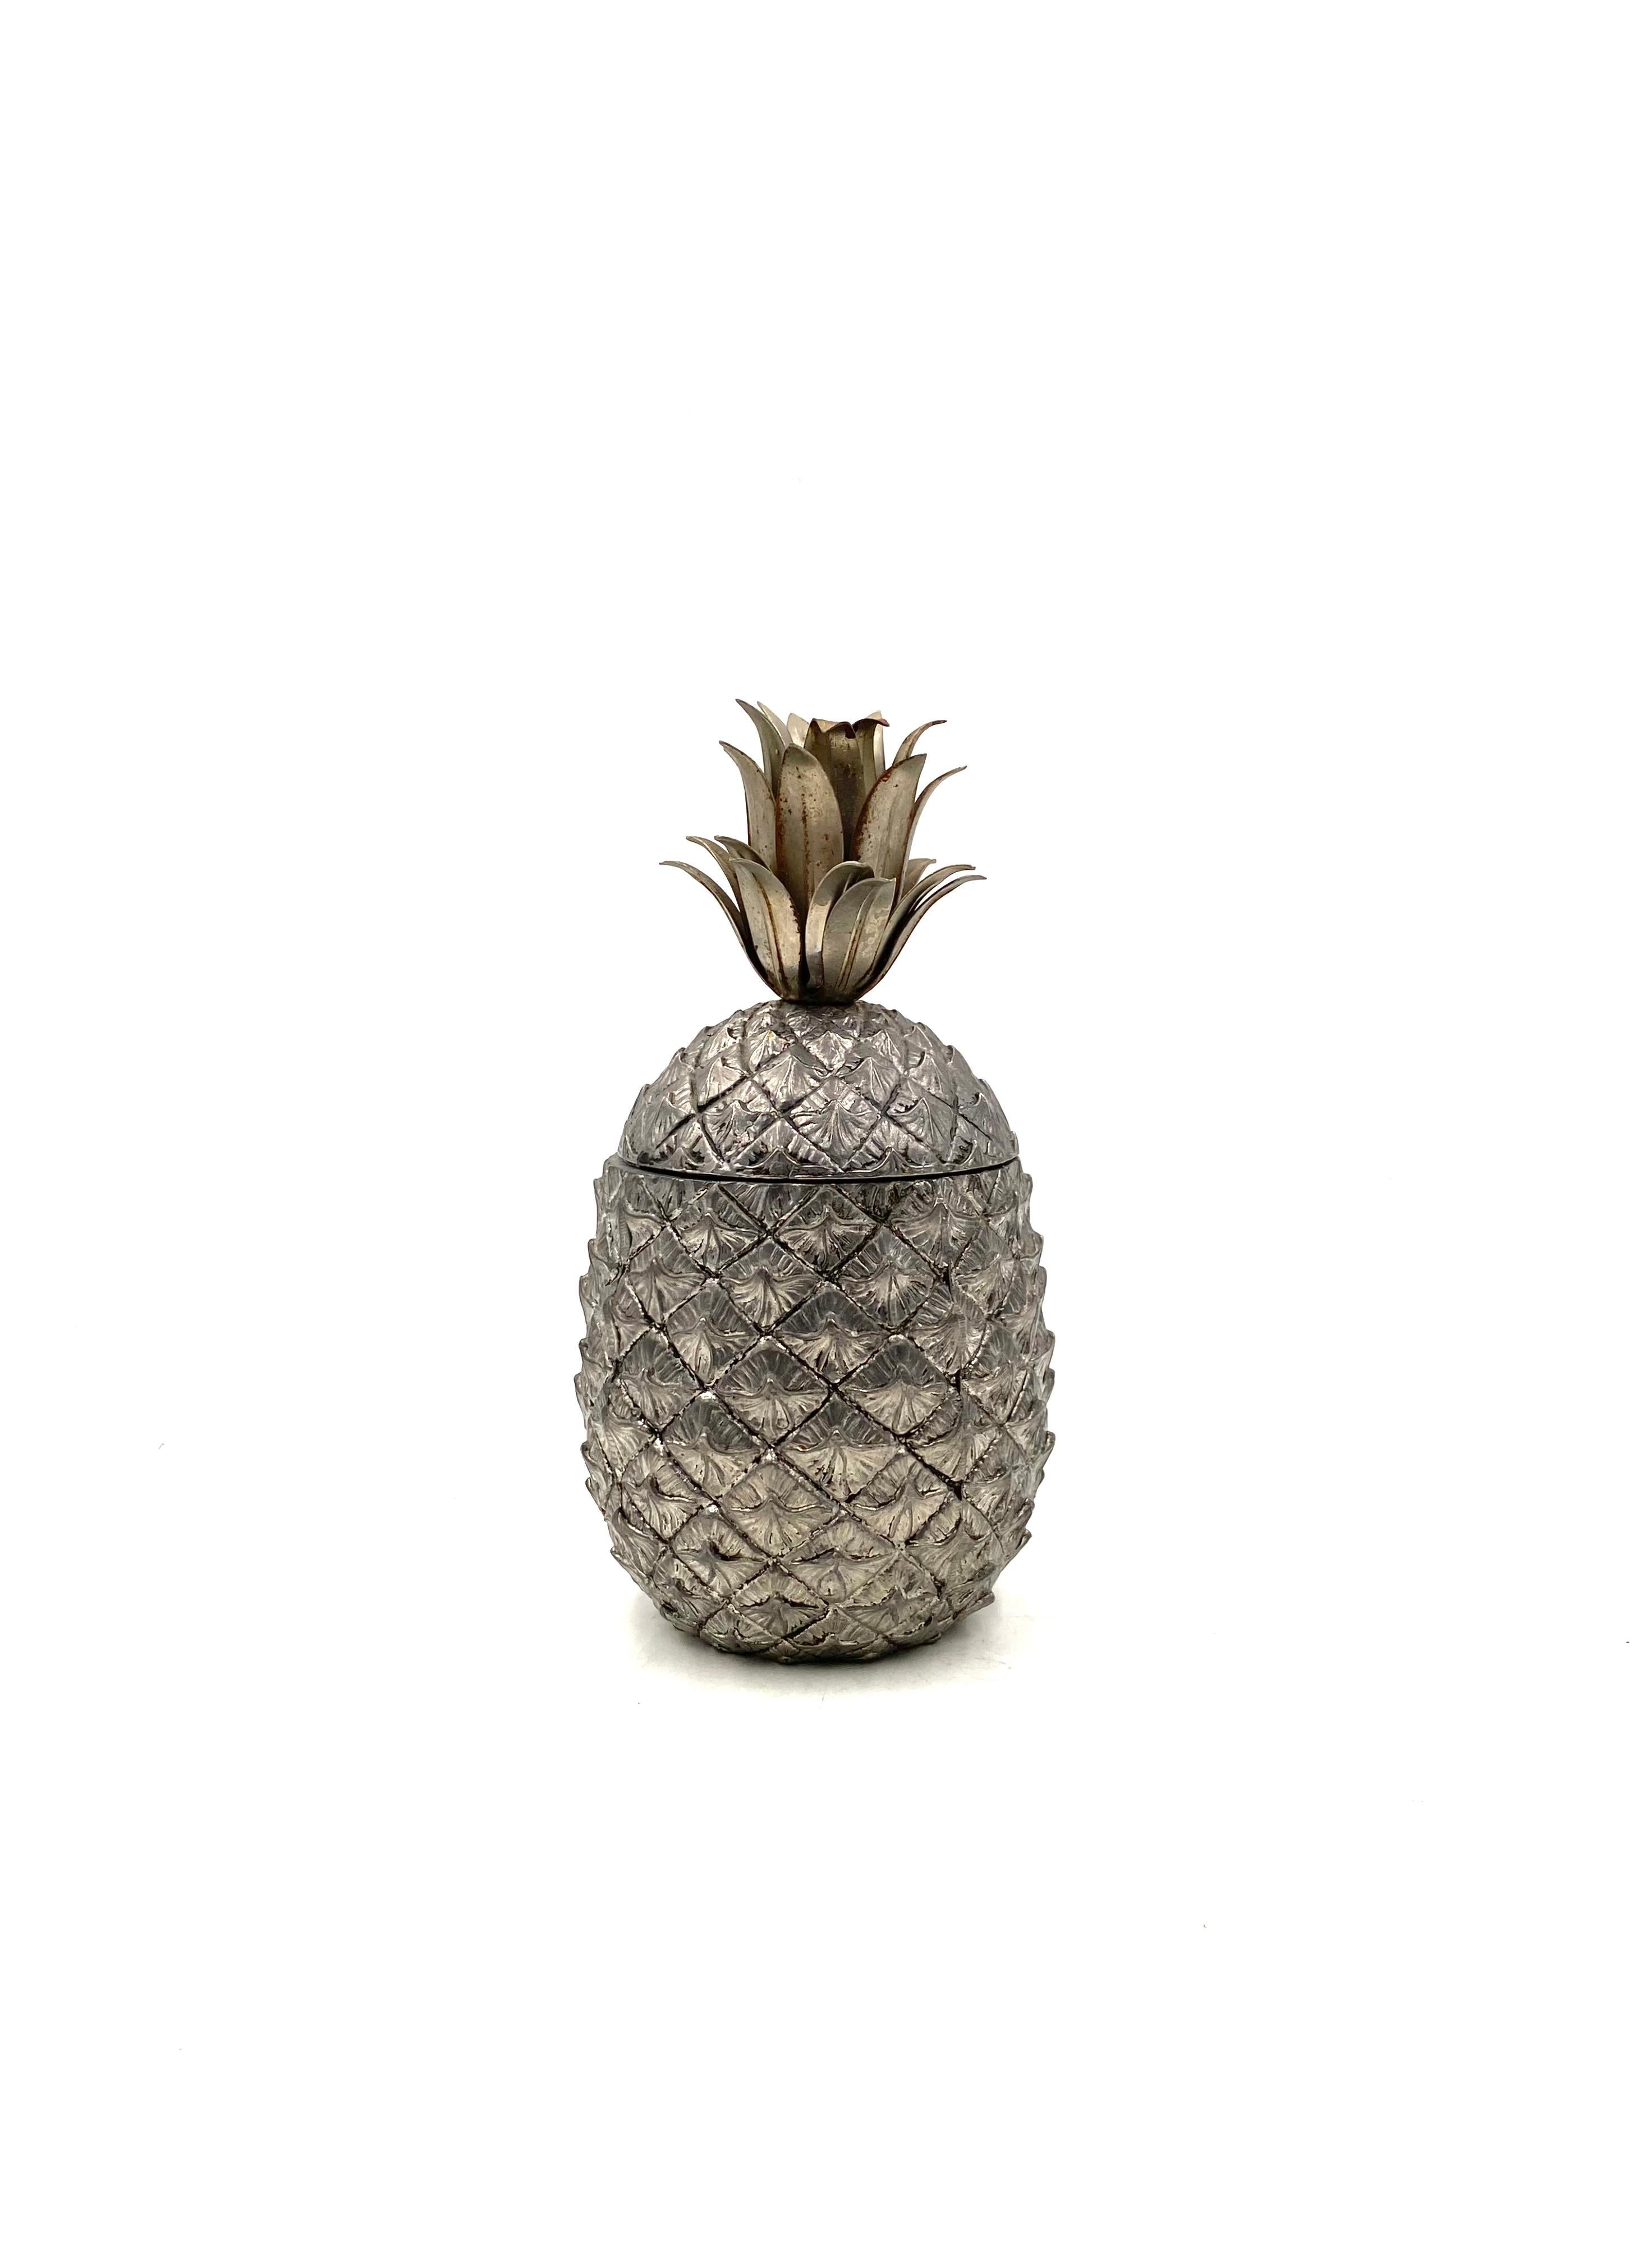 Silvered Pineapple Ice Bucket, Mauro Manetti Fonderie d'Arte, Italy 1970s 3